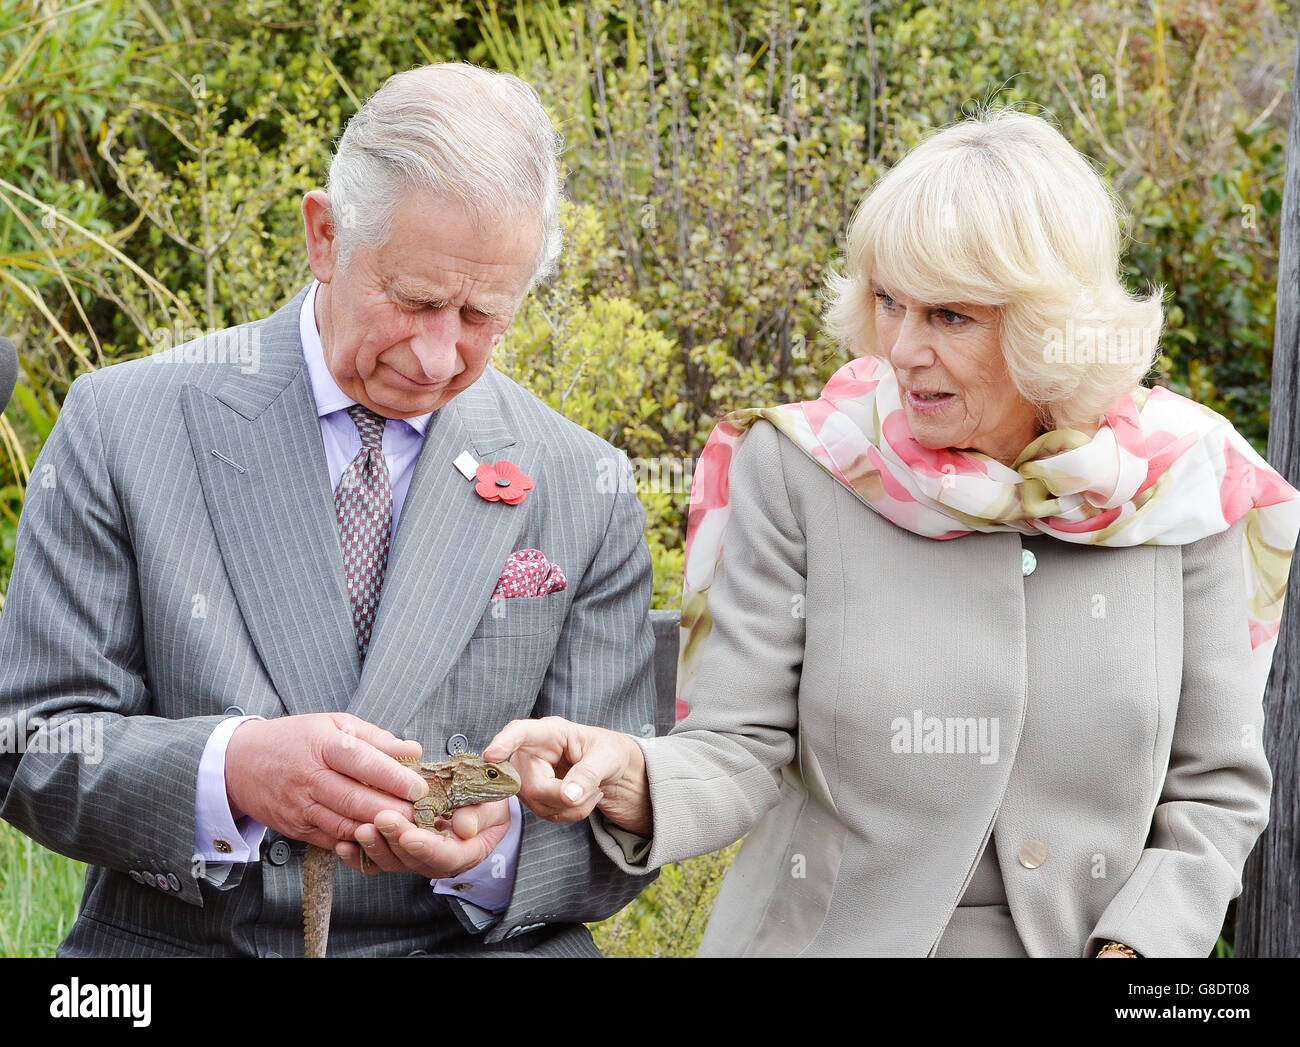 The Prince of Wales holds a reptile as the Duchess of Cornwall strokes its head, during a visit to the Orokonui ecosanctuary outside the city of Dunedin on the south island of New Zealand. Stock Photo